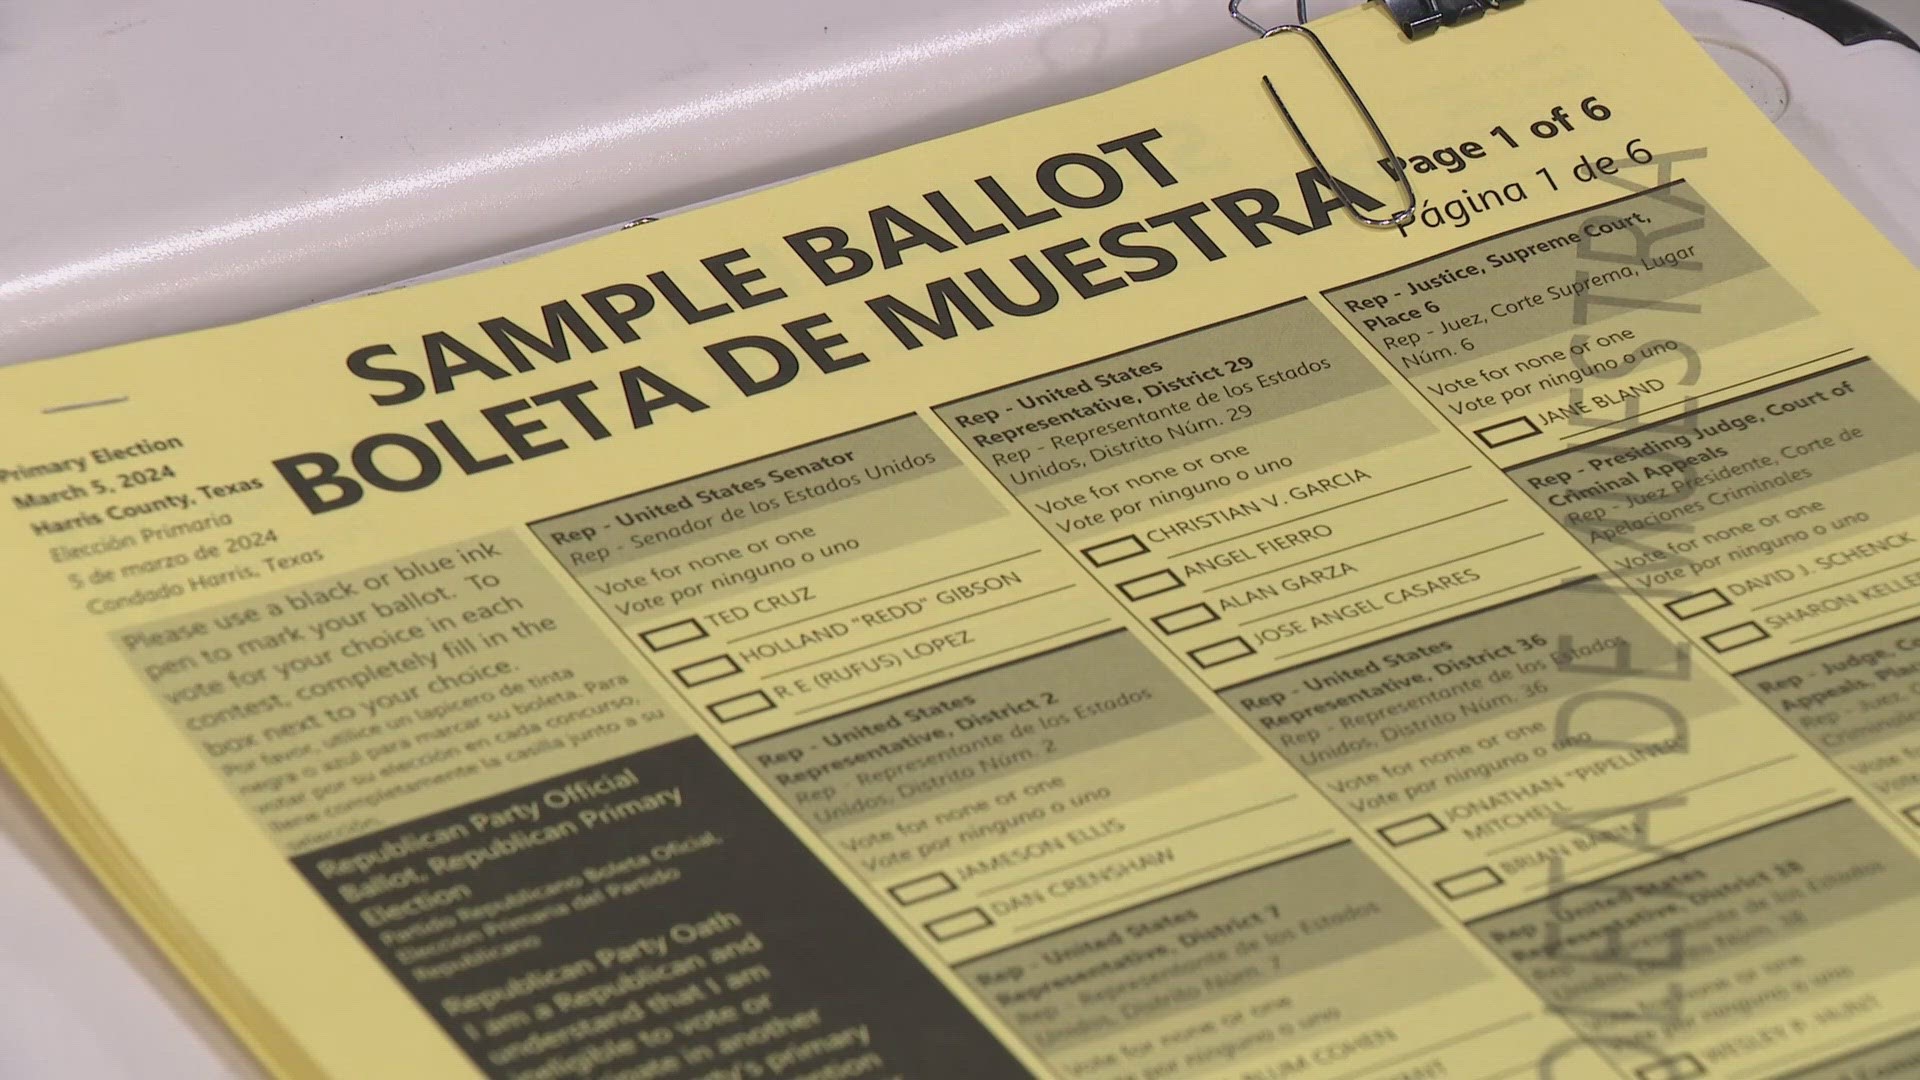 A Harris County woman and her husband said they still haven't received their mail-in ballot, despite having sent in their application over a month ago.